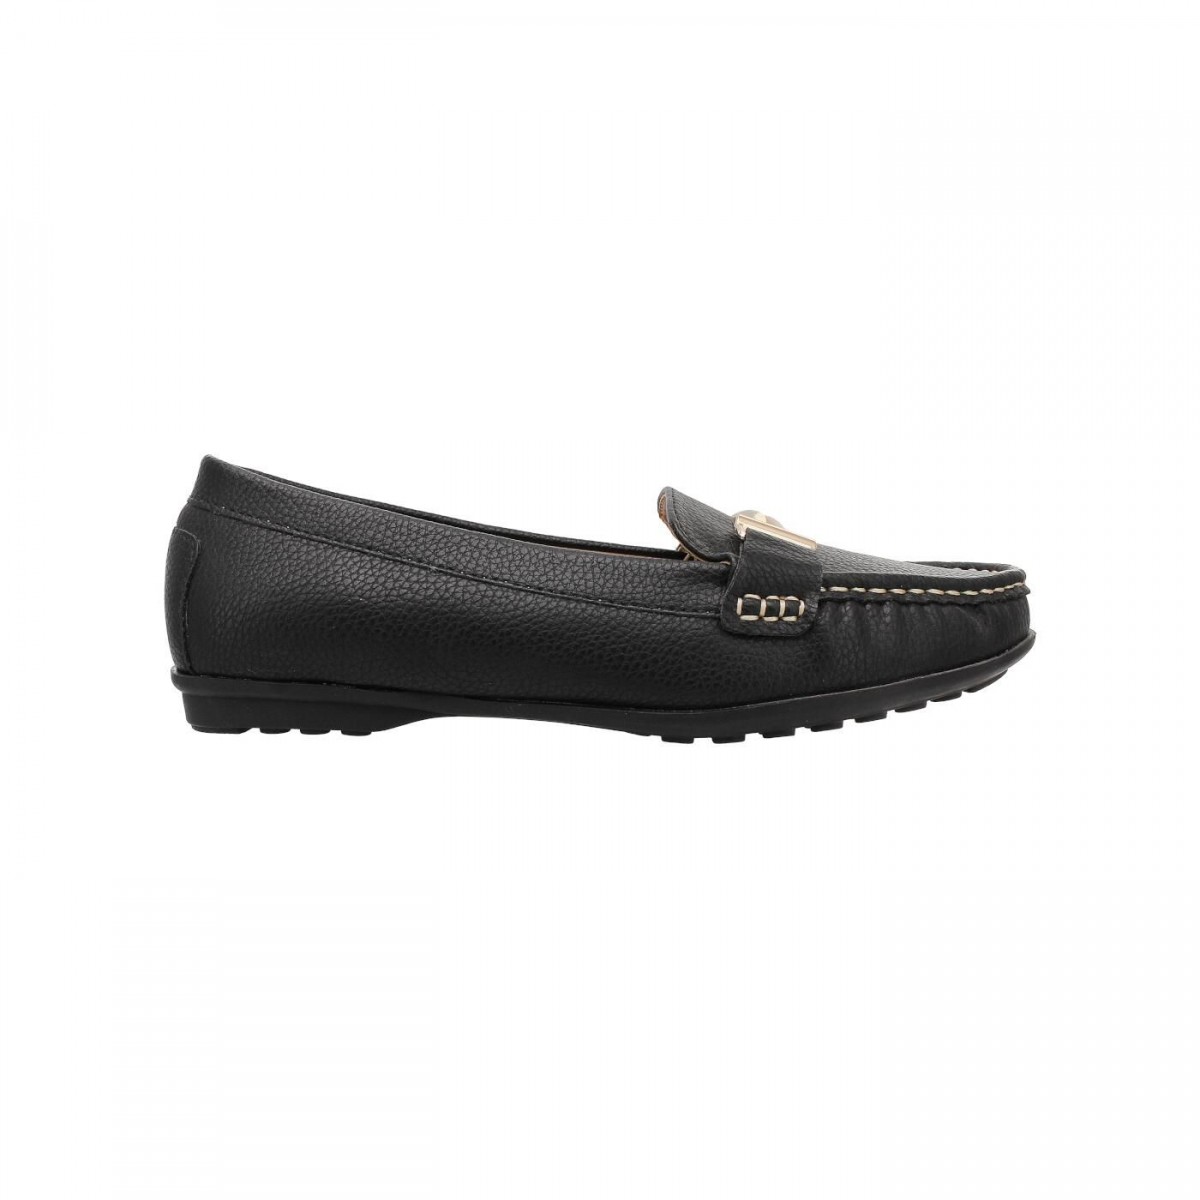 /2019/08/liza-buckled-casual-loafers-lz-cf-0523-black-image2.jpeg